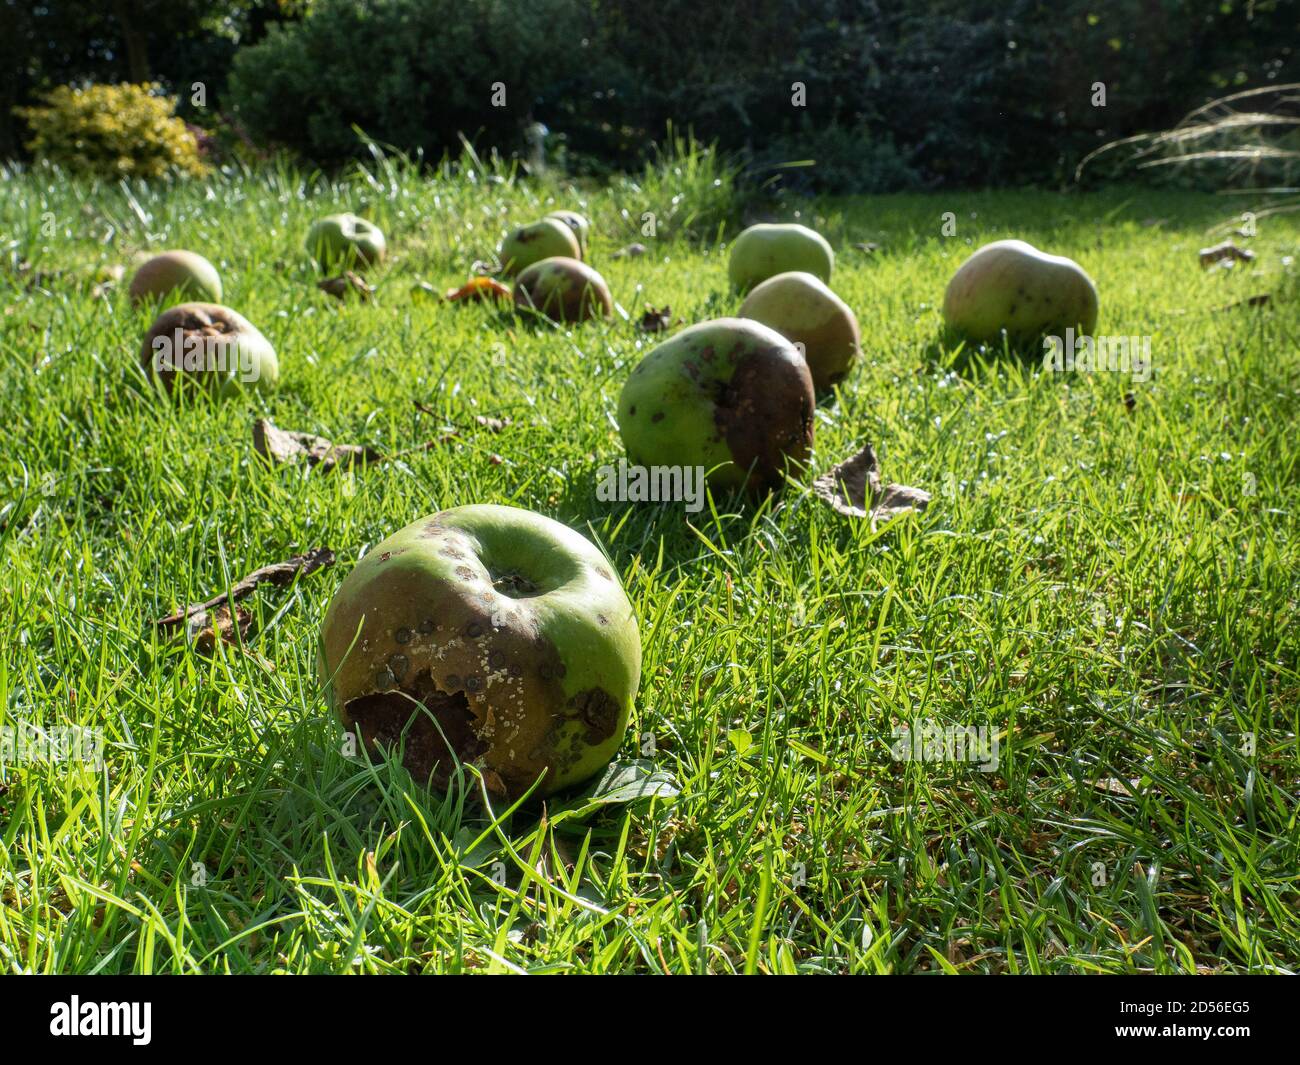 A ground level view of windfall apples lying on grass highlighted in the sunshine Stock Photo